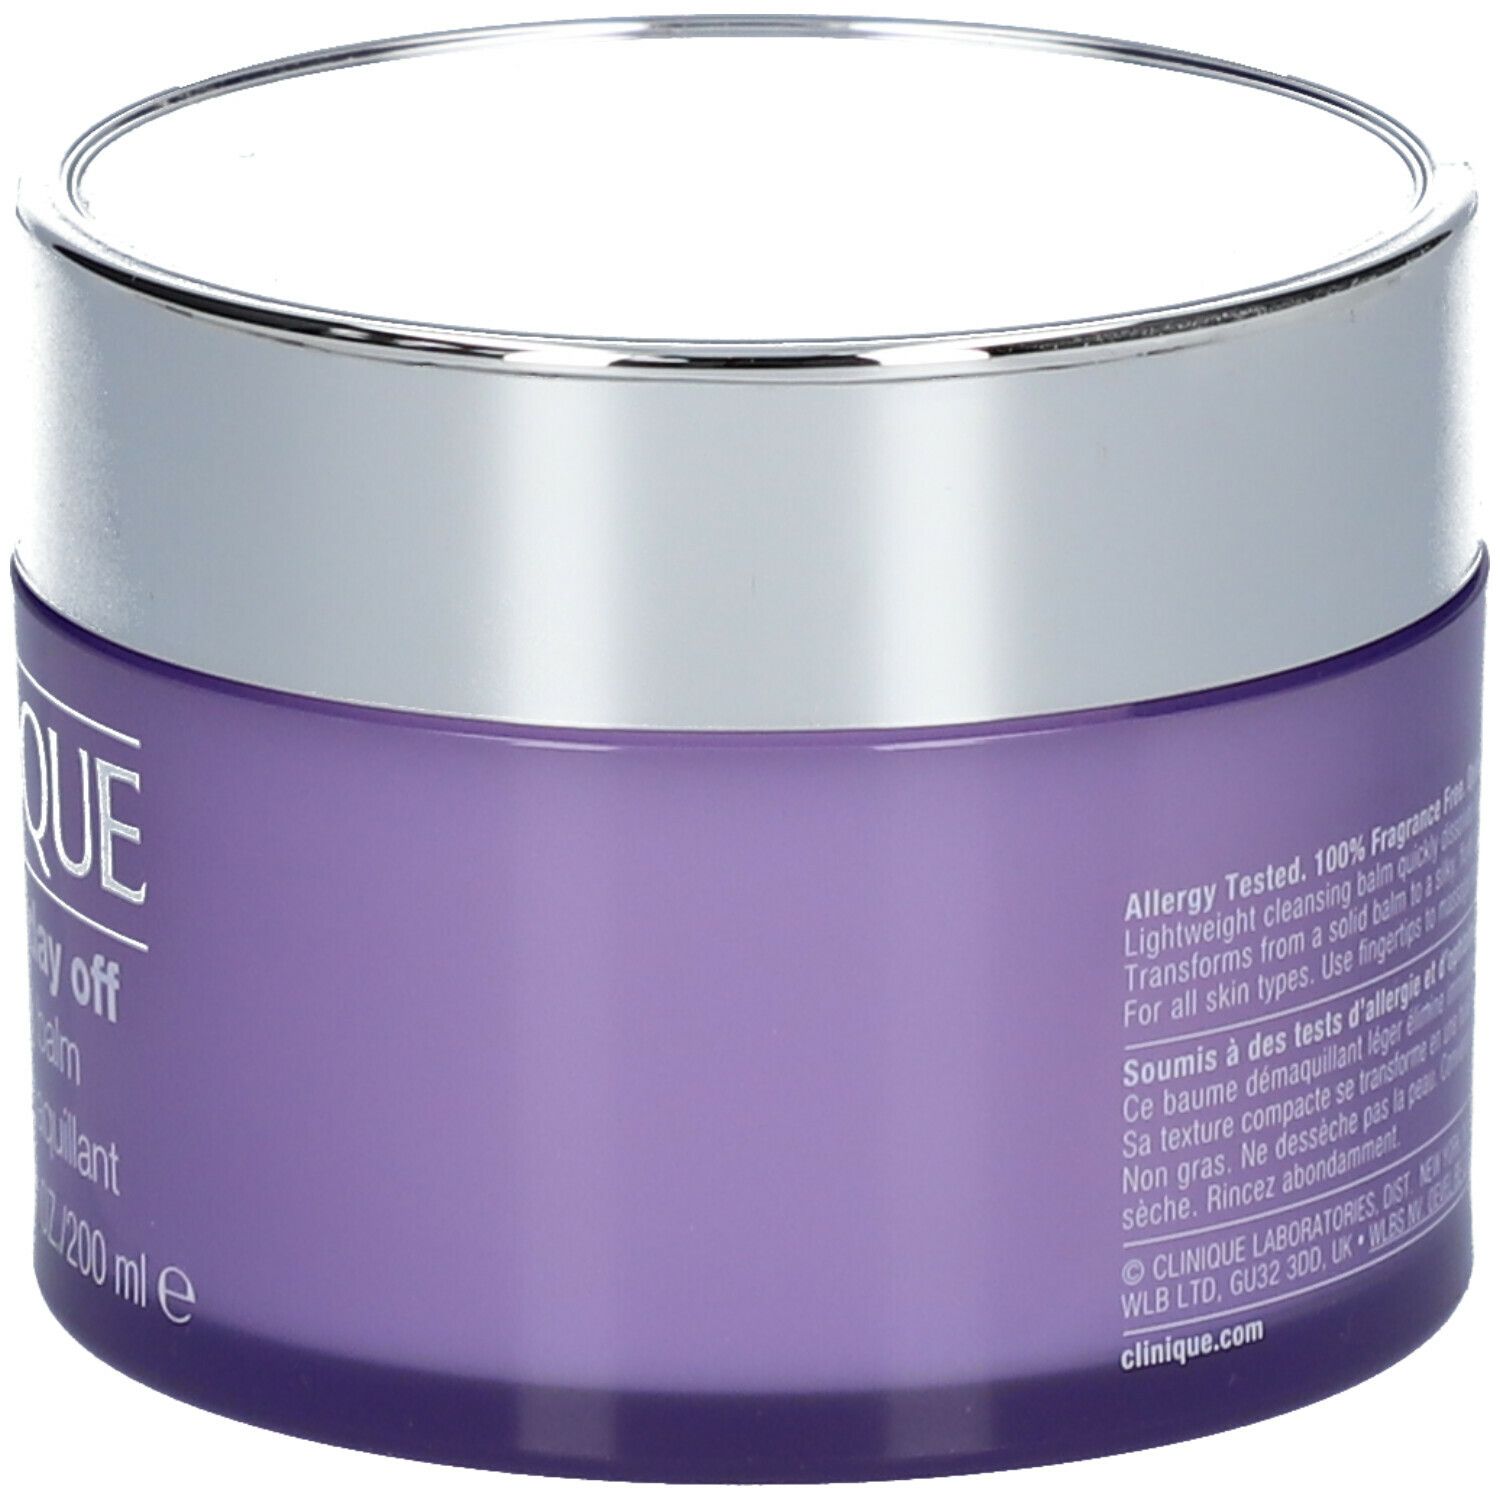 CLINIQUE Take The Make-up-Entferner Day 200 ml Cleansing Off™ Balm